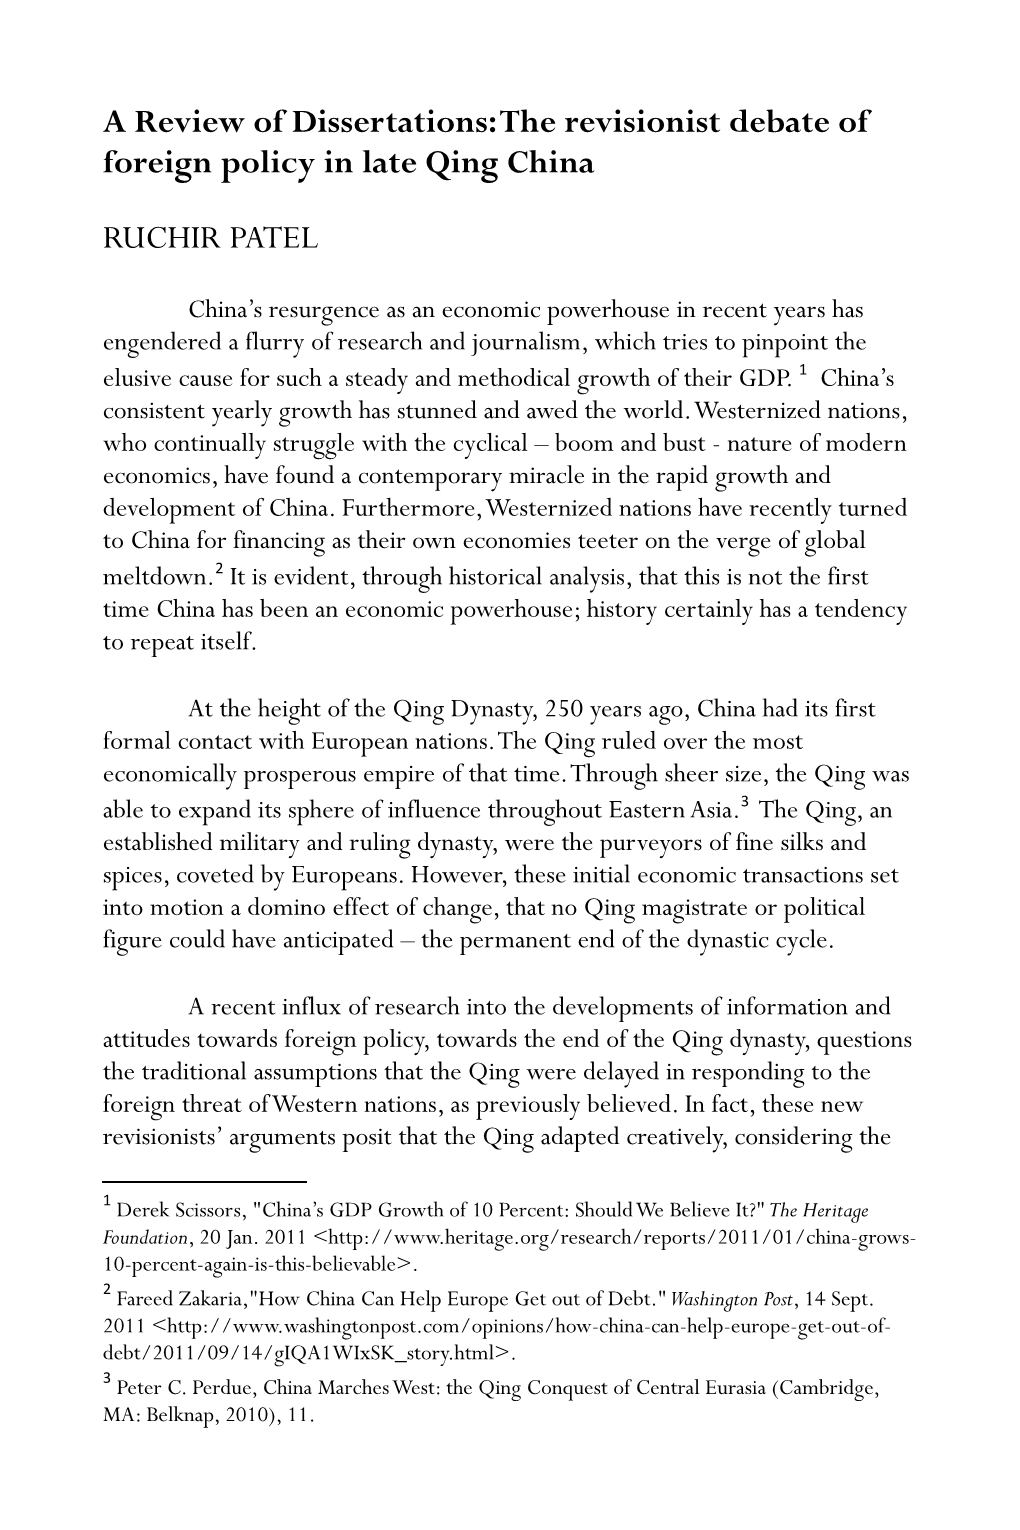 A Review of Dissertations: the Revisionist Debate of Foreign Policy in Late Qing China RUCHIR PATEL